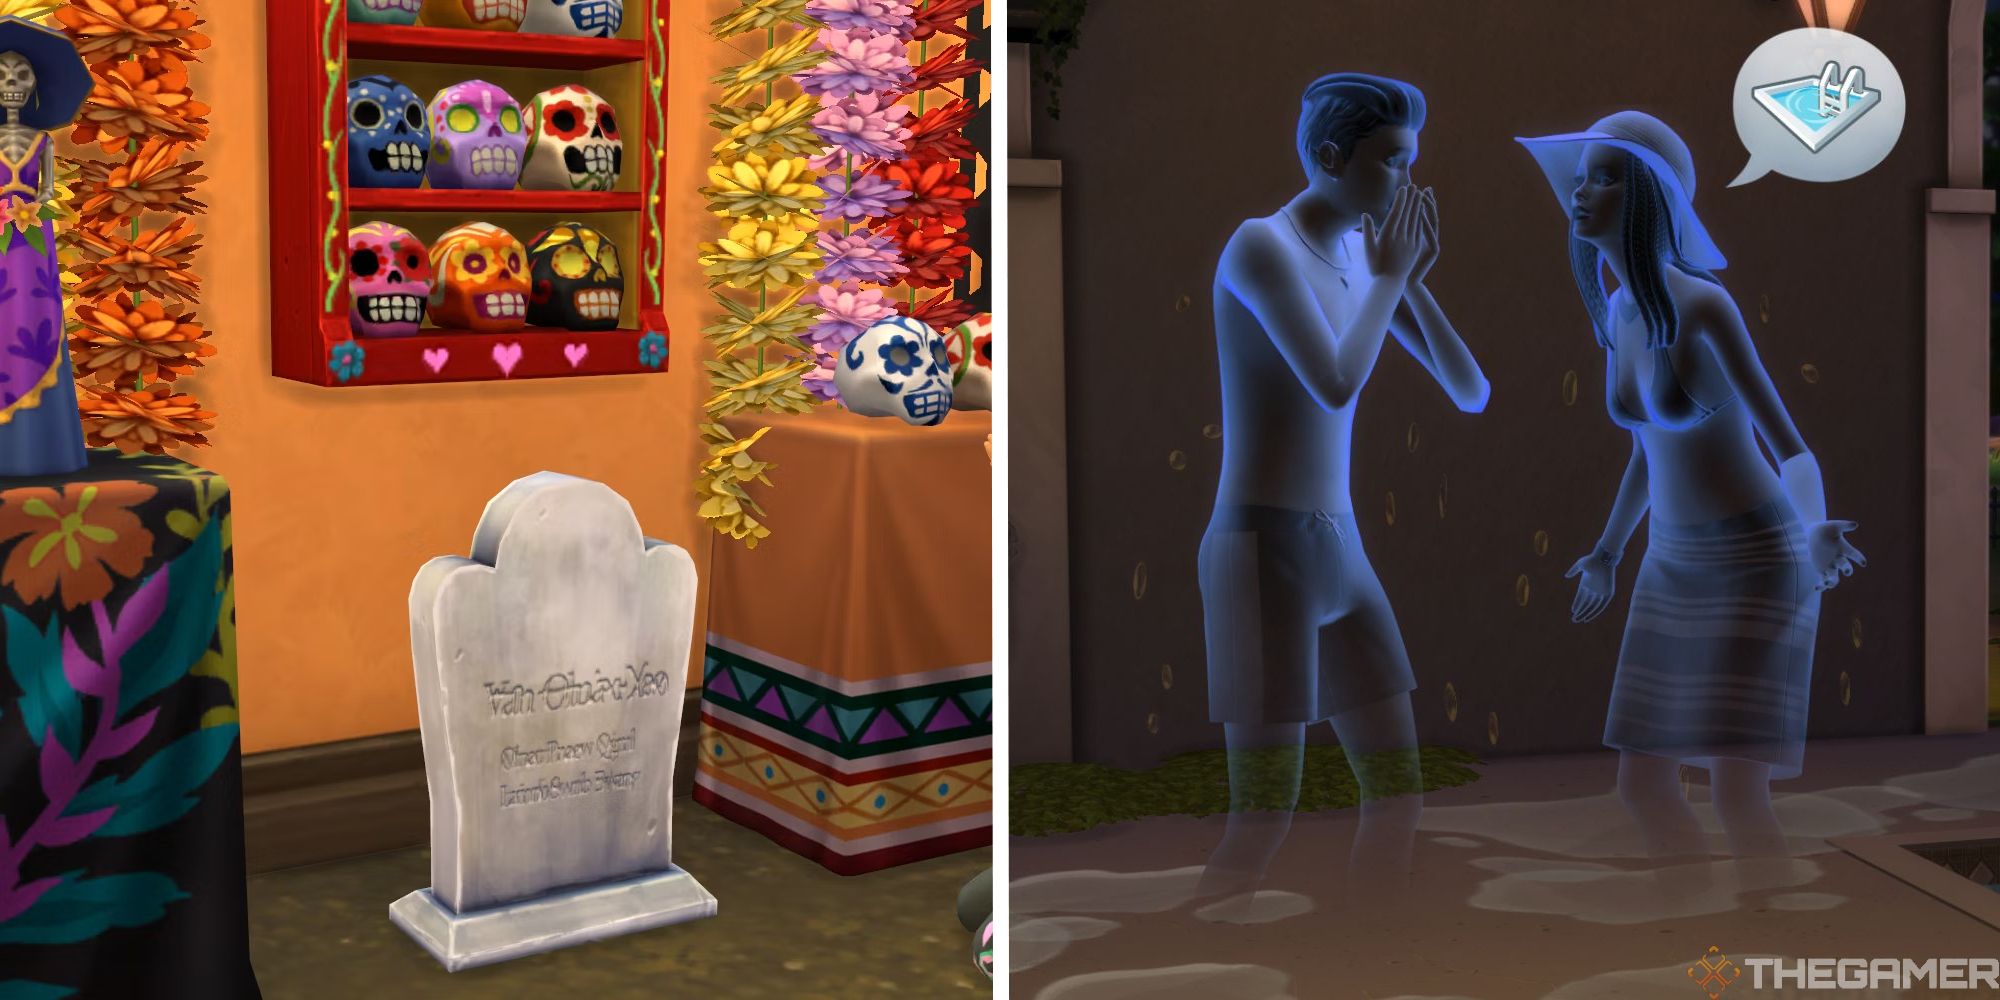 split image showing gravestone next to image of two blue sims talking about the pool